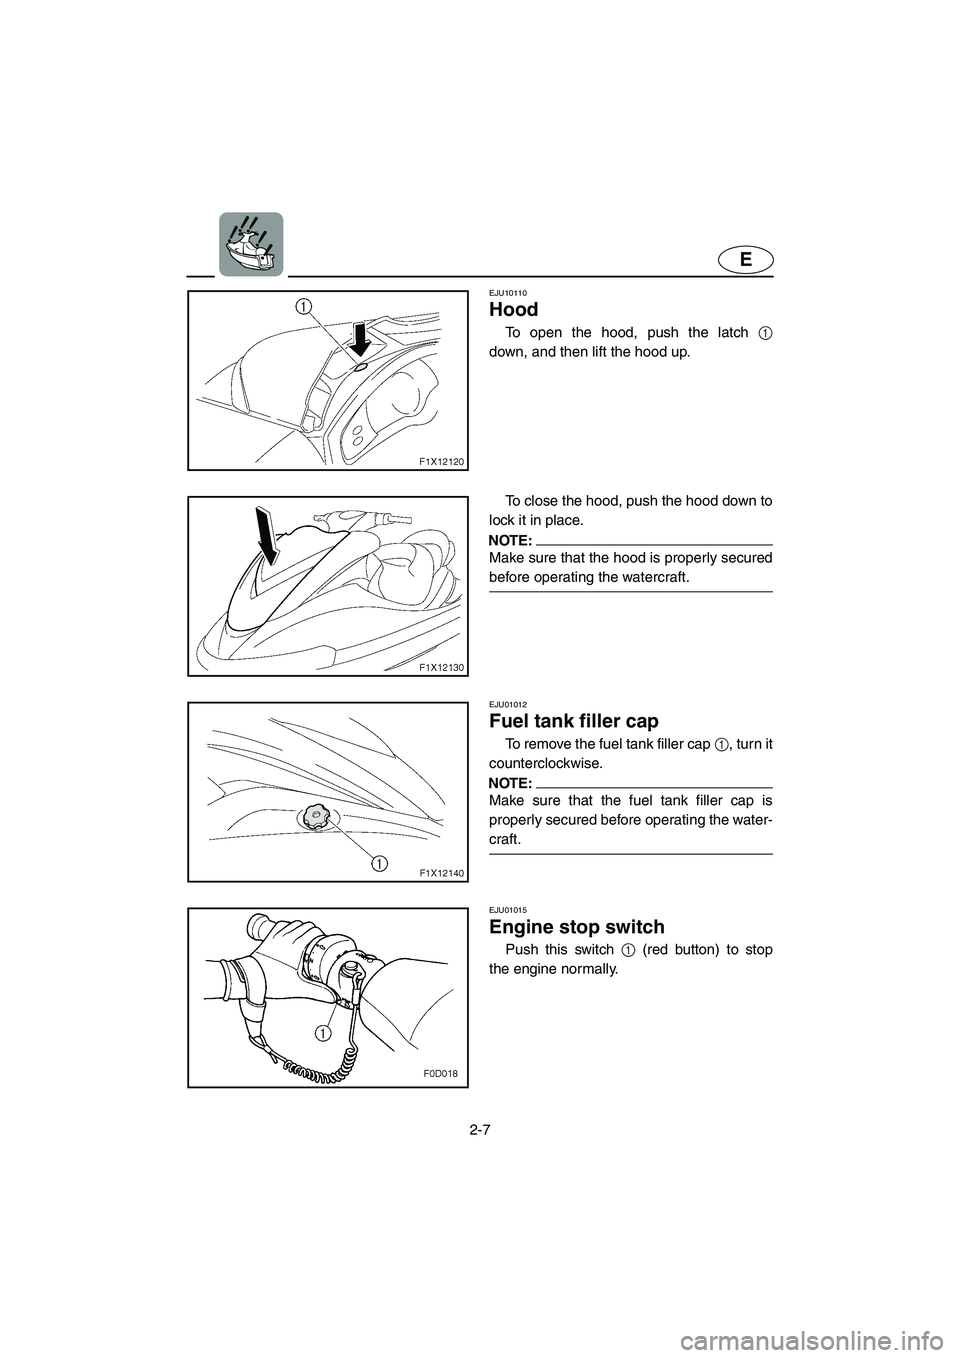 YAMAHA FX CRUISER 2006  Owners Manual 2-7
E
EJU10110 
Hood  
To open the hood, push the latch 1
down, and then lift the hood up. 
To close the hood, push the hood down to
lock it in place. 
NOTE:@ Make sure that the hood is properly secur